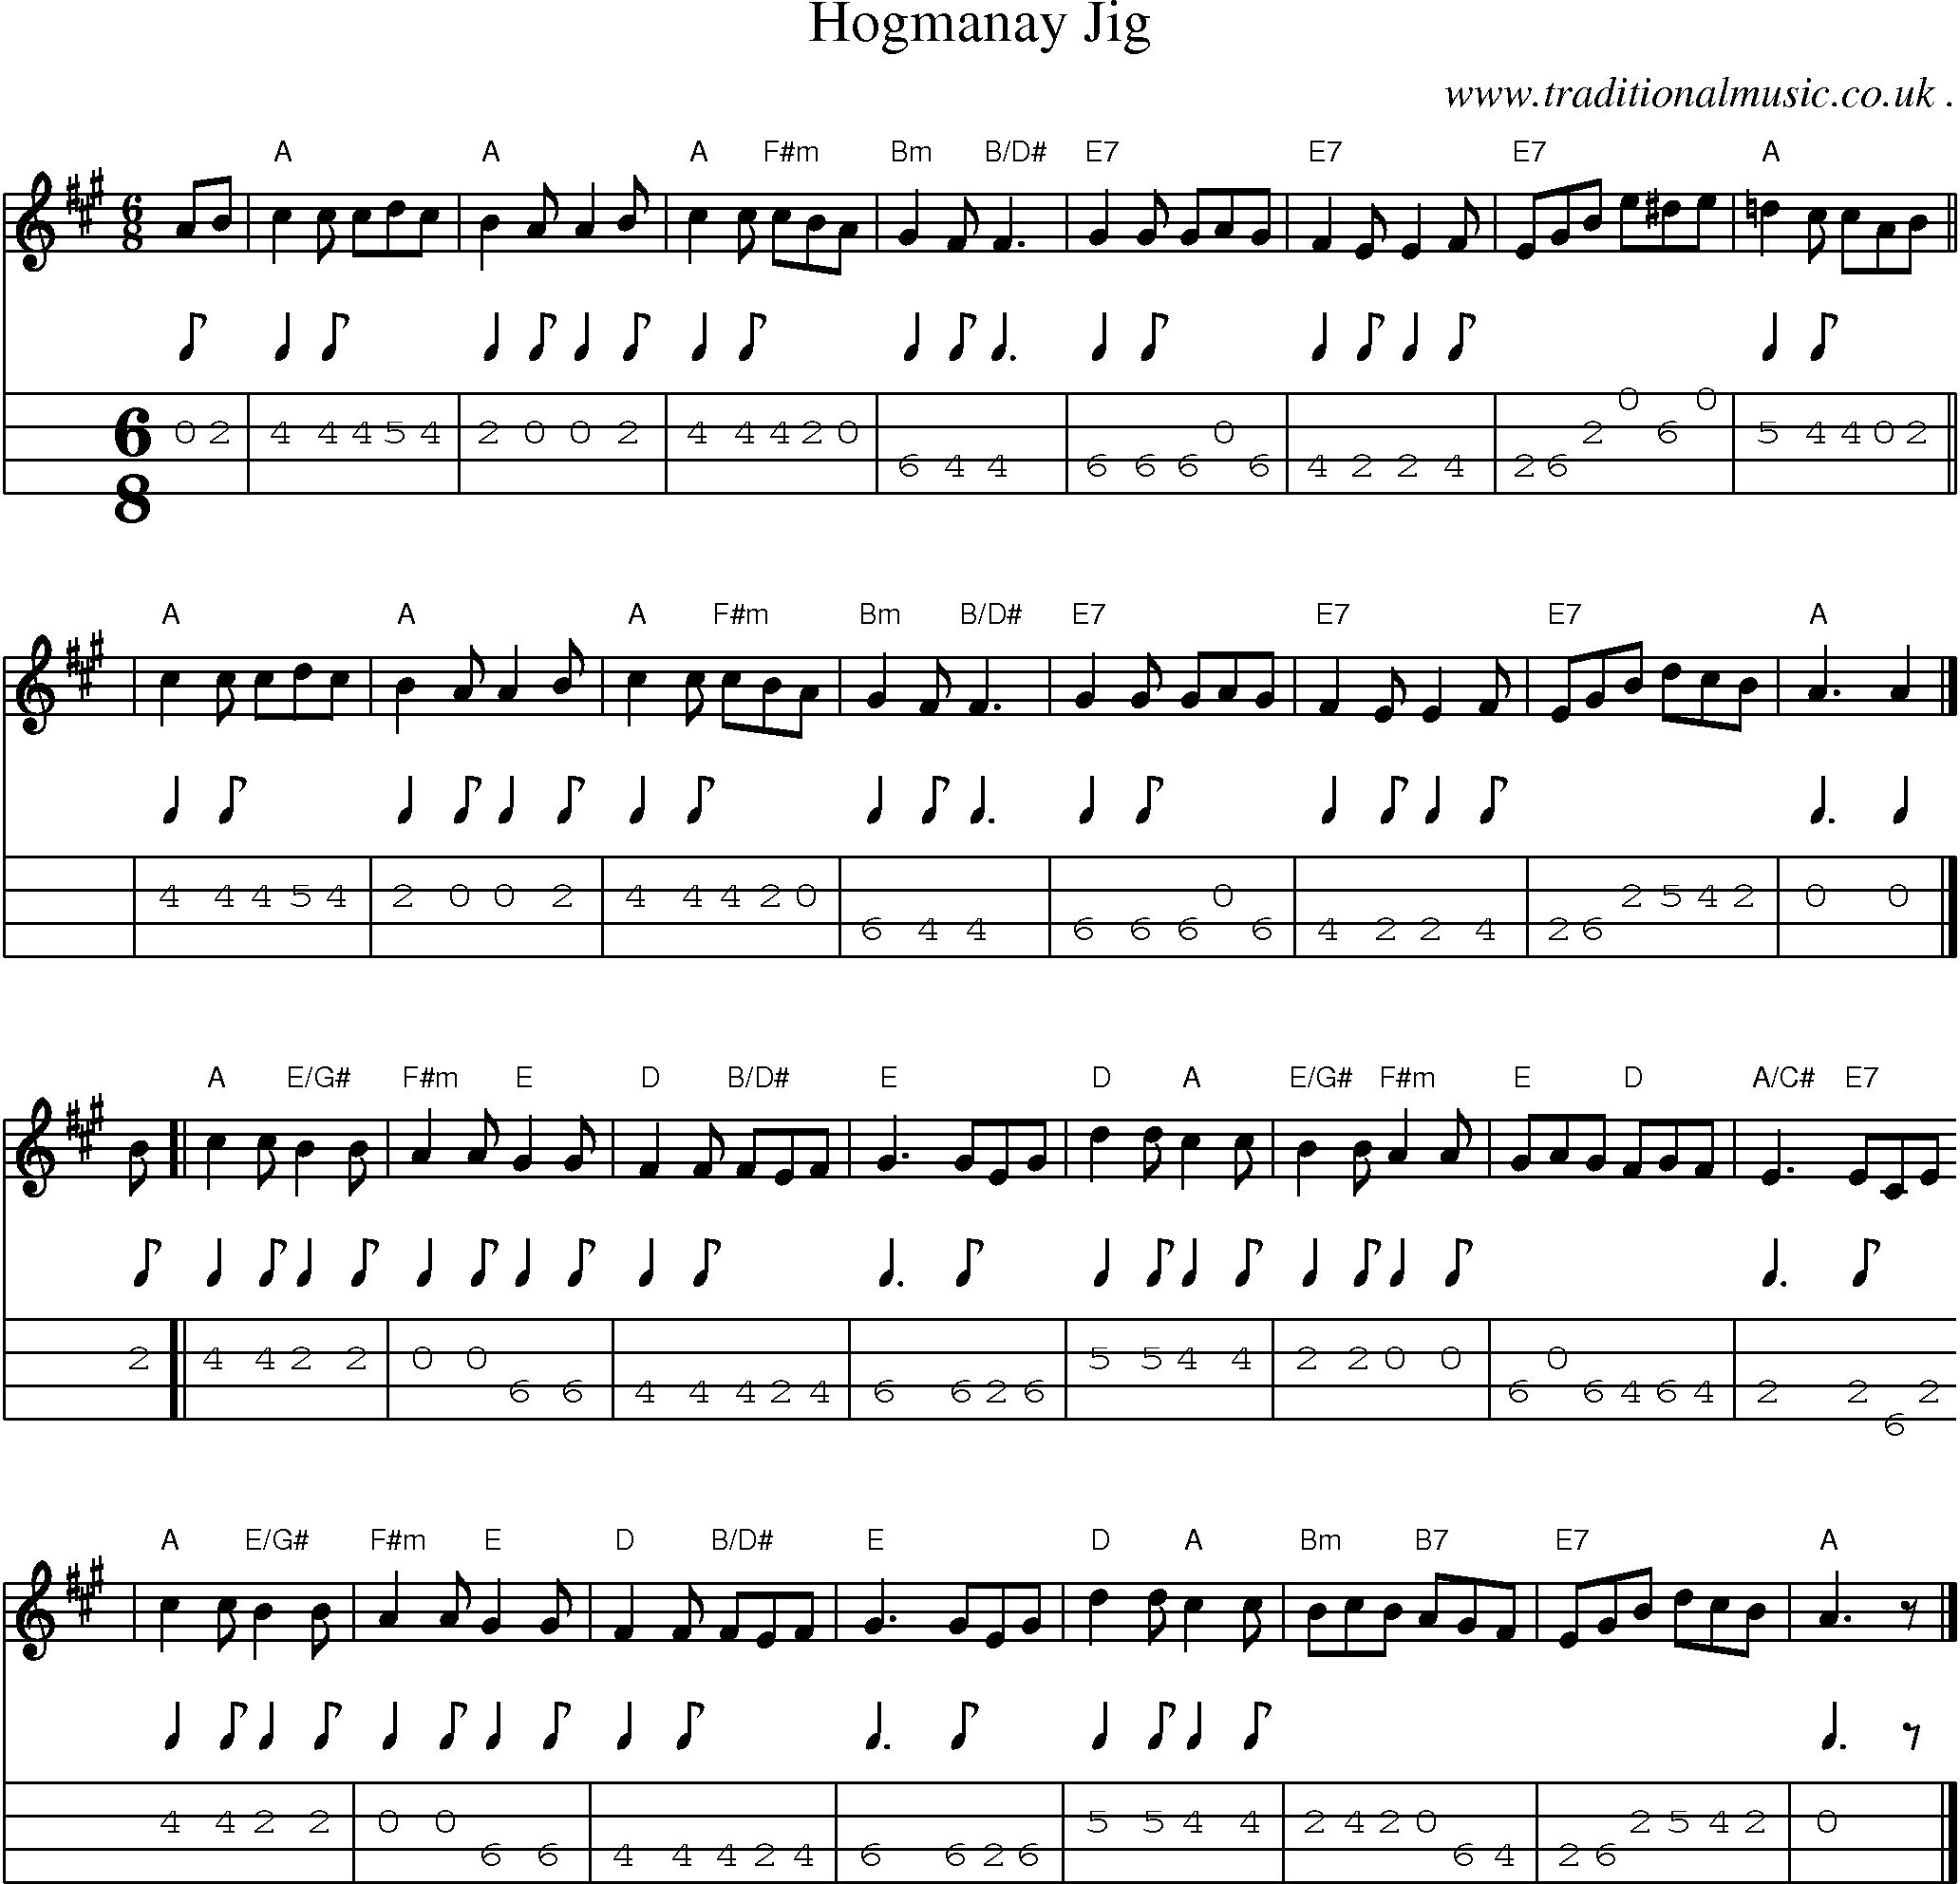 Sheet-music  score, Chords and Mandolin Tabs for Hogmanay Jig